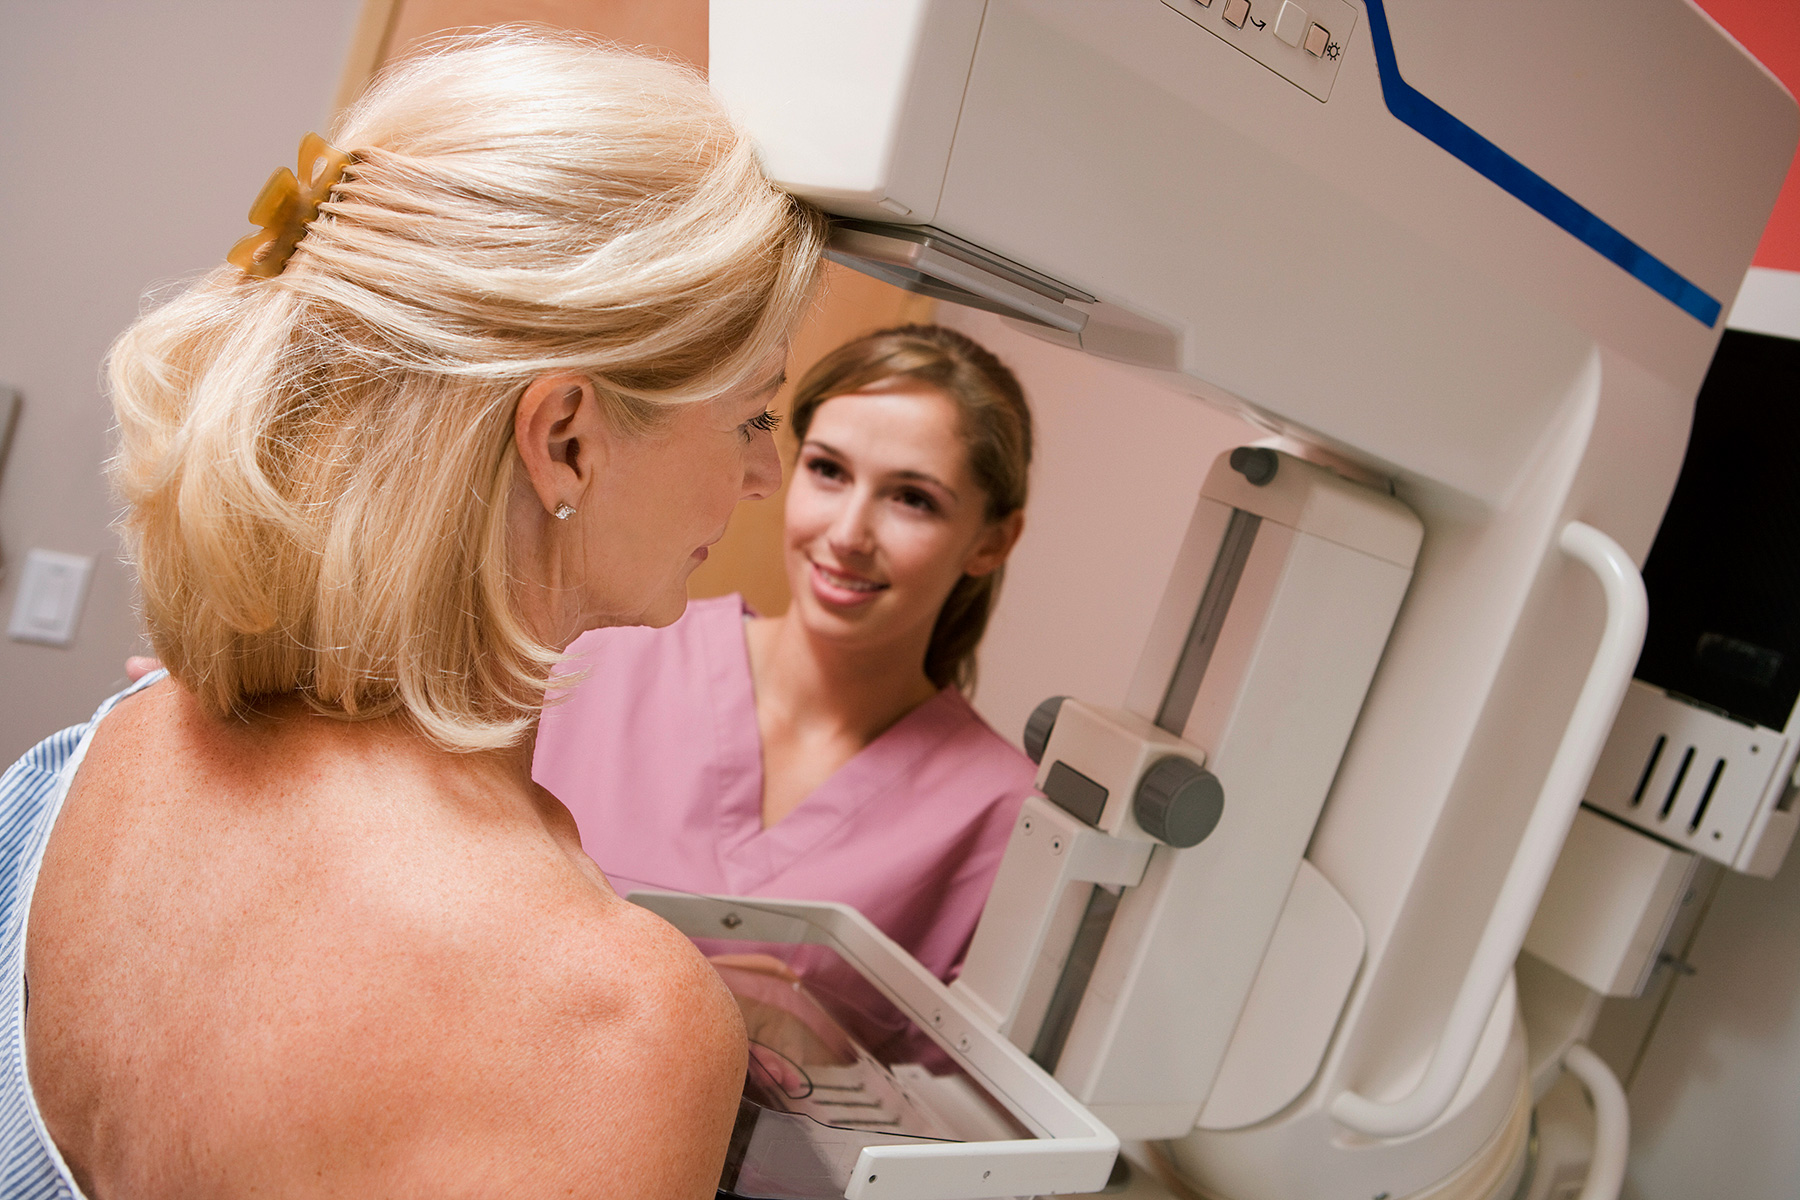 Skipping Mammograms Raises Odds for Breast Most cancers